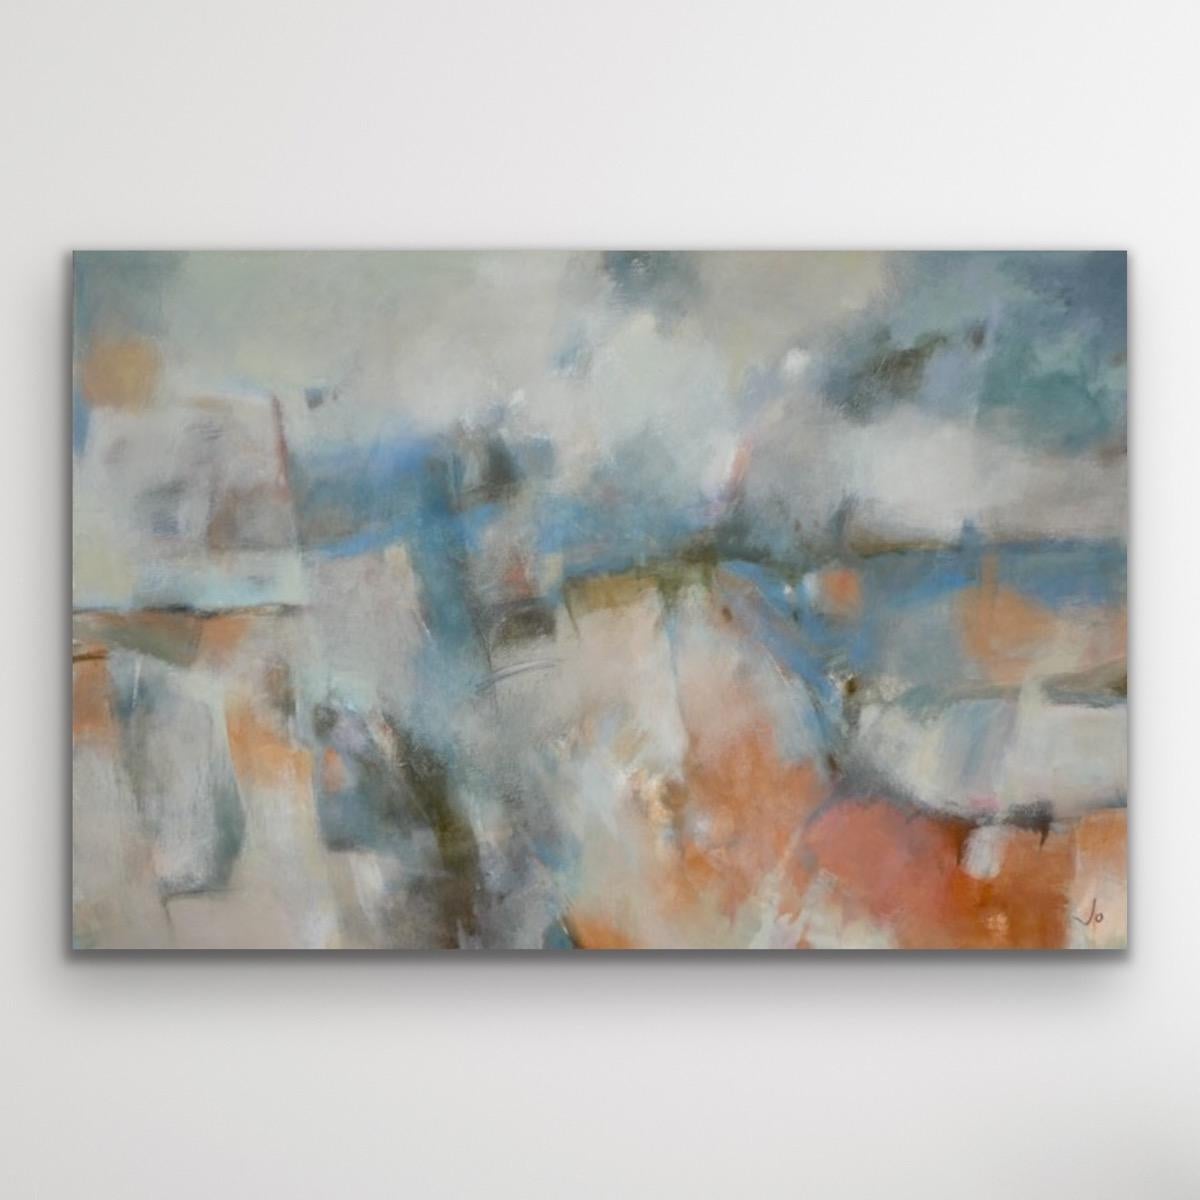 Original landscape painting with a strong sense of light and menacing weather. A rectangular painting with strong horizontal qualities and rhythmical lines. Variations of complementary colours - blues and oranges give it an almost abstract